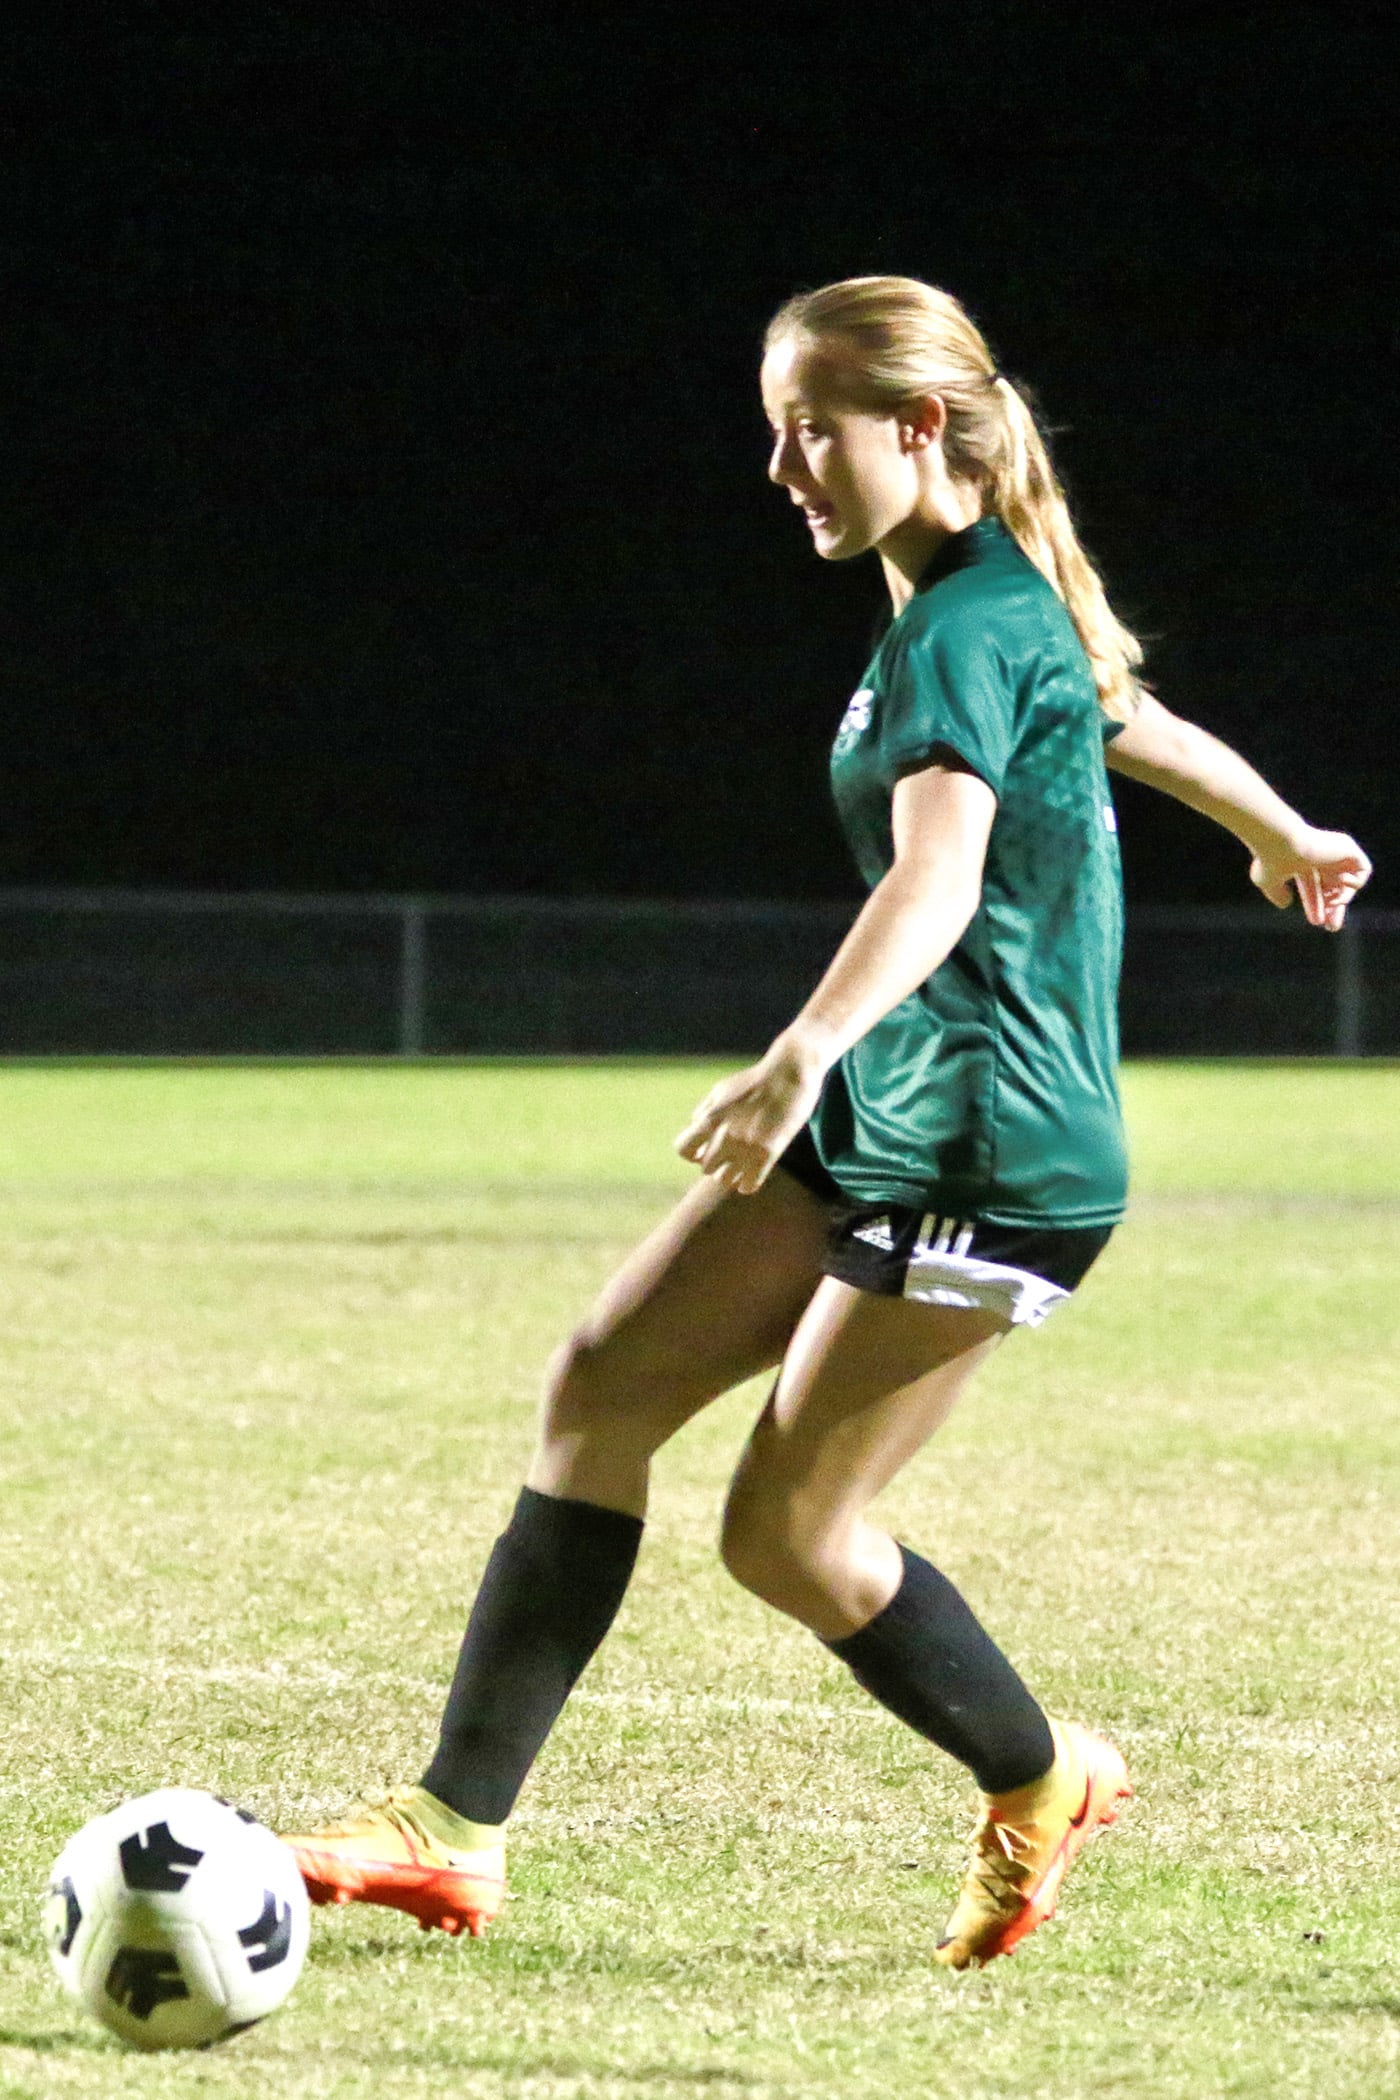 Wednesday night 12/7/22, HHS vs WW Girls Soccer game. Hornet #7 Lola Northrop warming up before taking on the leopards.